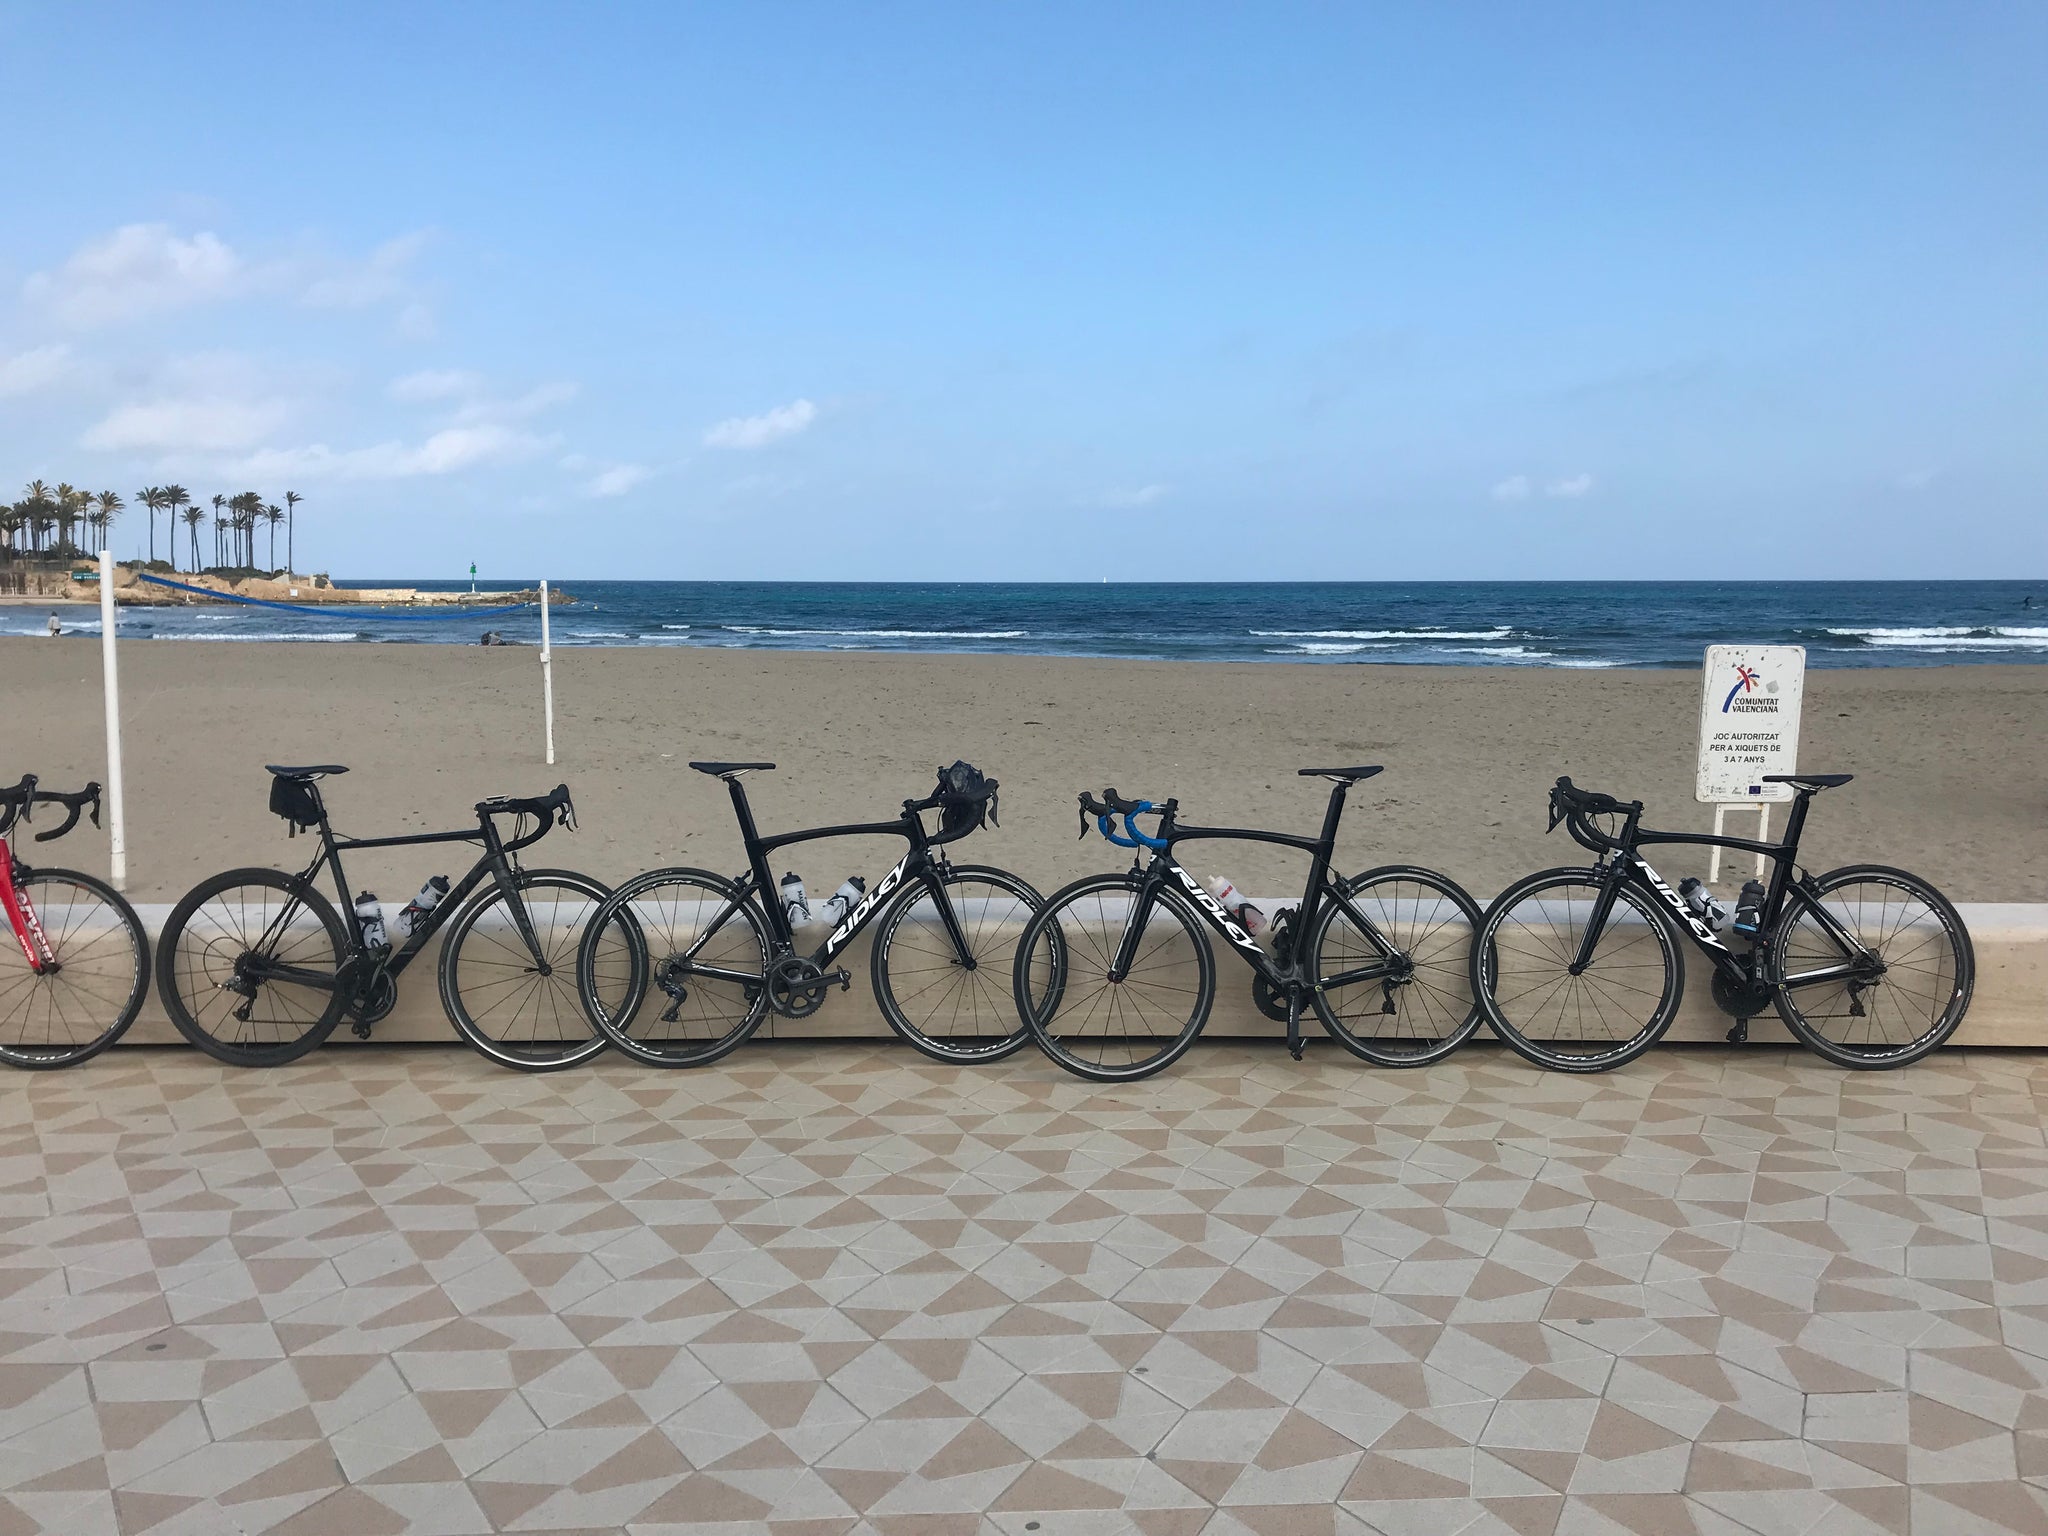 Bikes by the sea